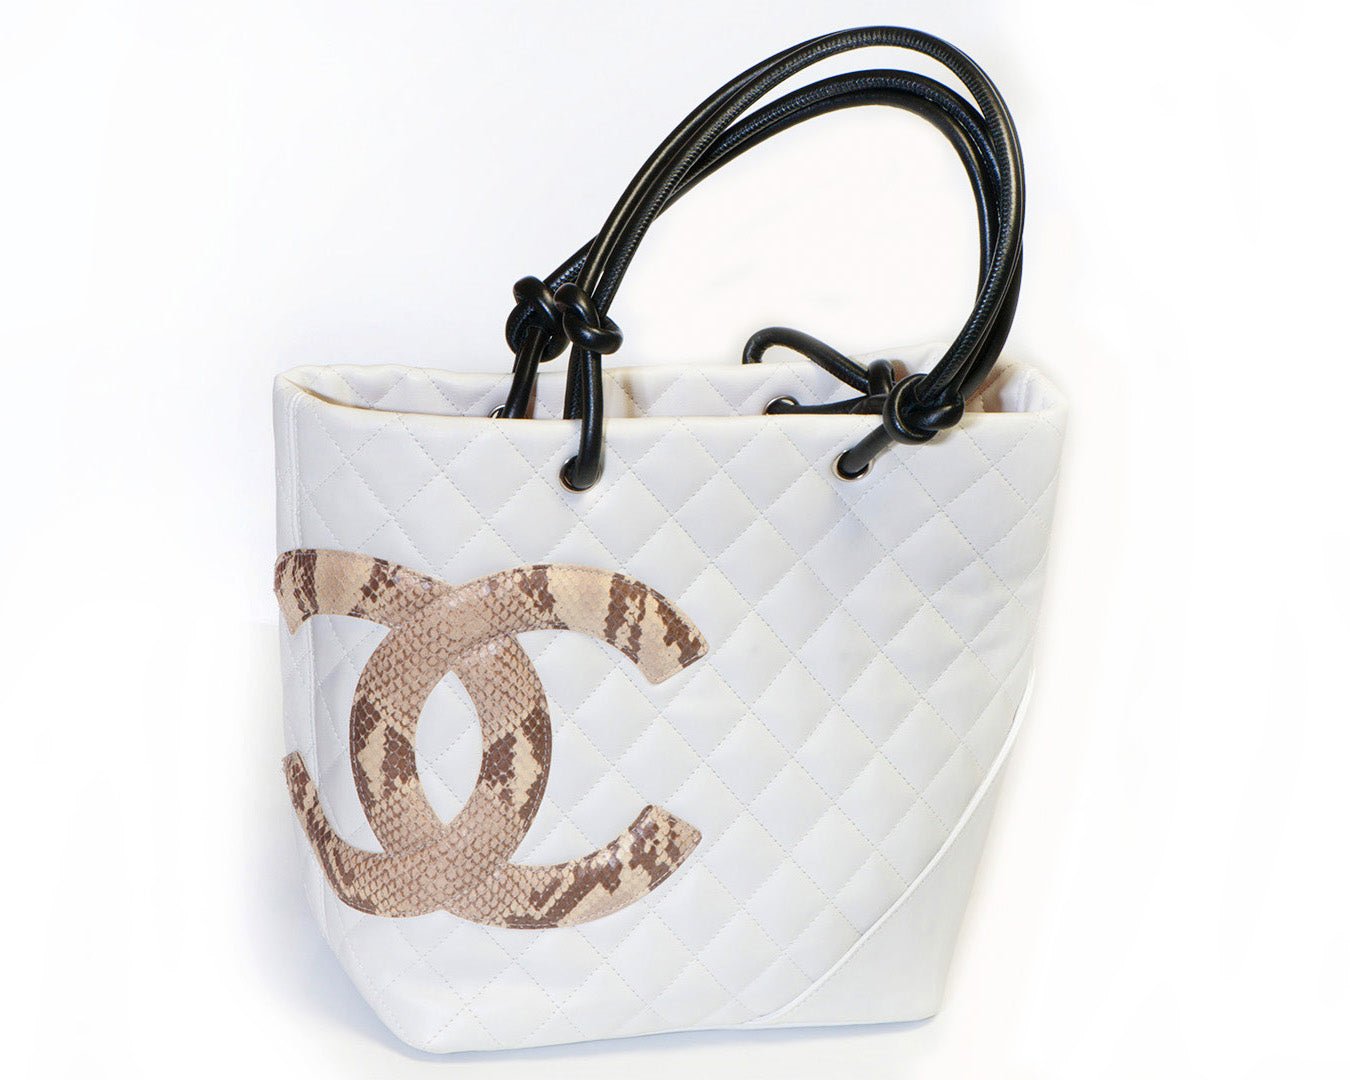 Chanel Paris White Quilted Leather Snakeskin CC Cambon Tote Bag - DSF Antique Jewelry